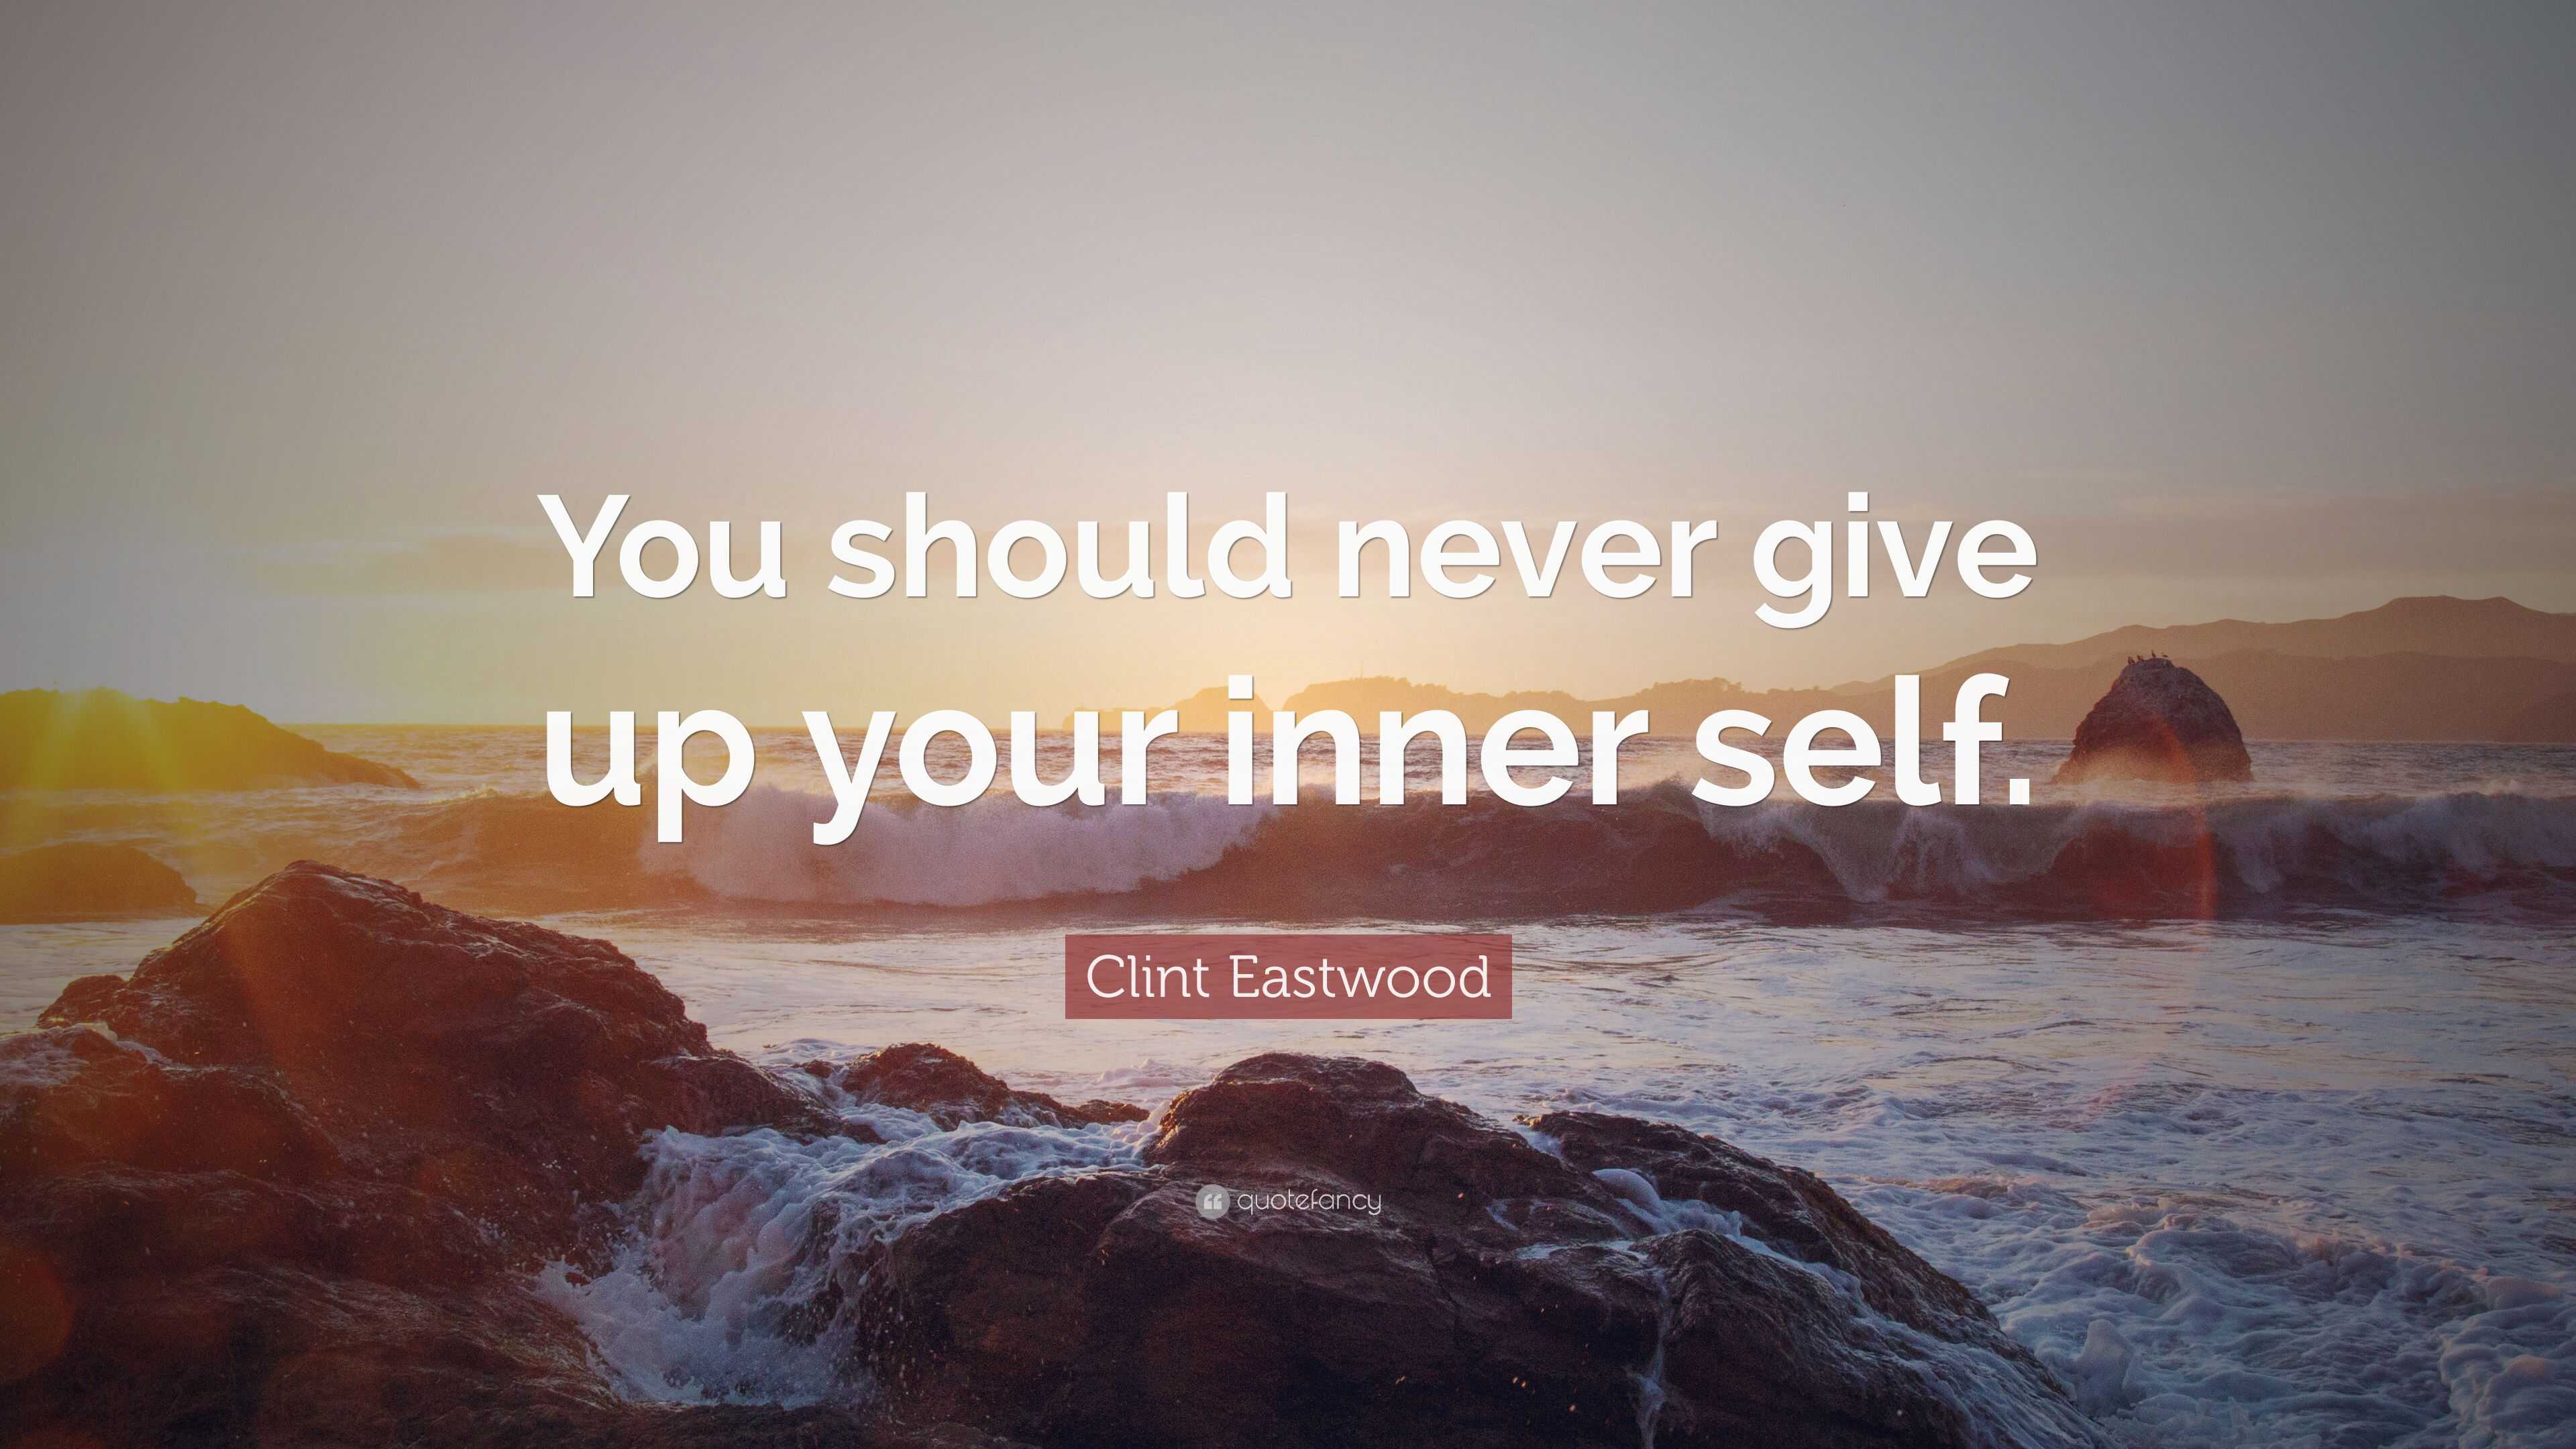 Clint Eastwood Quote: “You should never give up your inner self.”